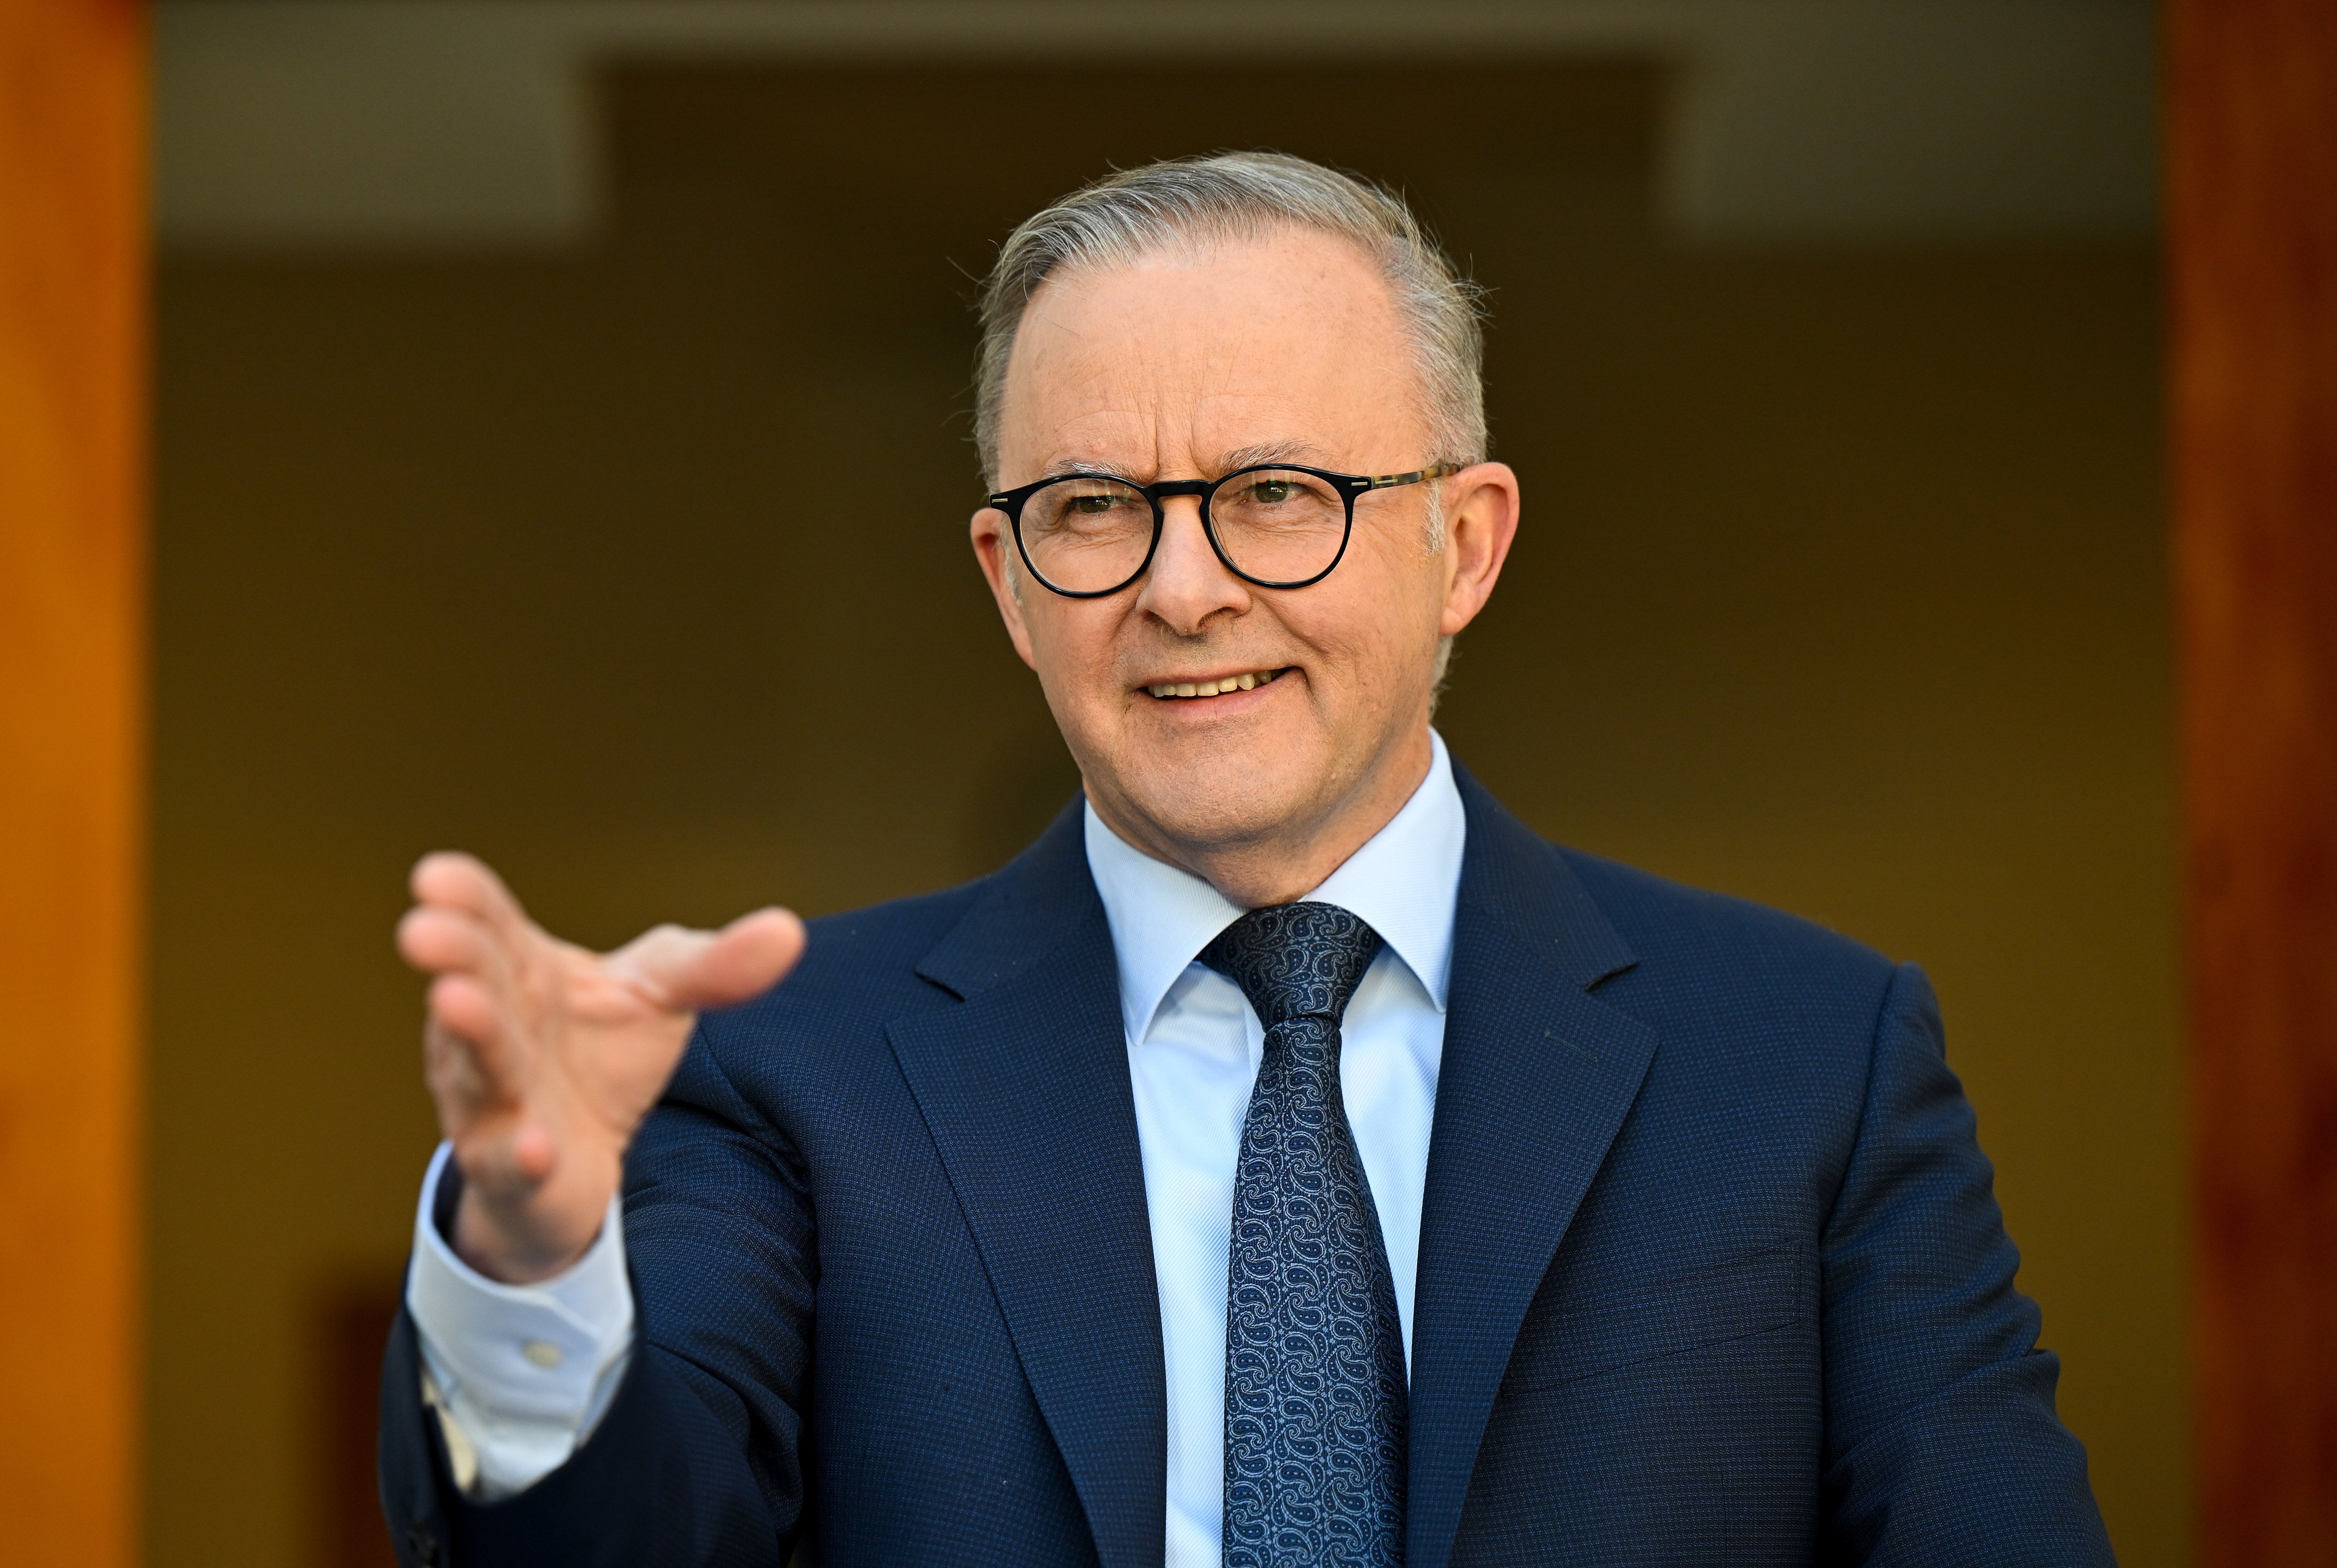 Australian Prime Minister Anthony Albanese is set to hold talks with Chinese President Xi Jinping and Premier Li Qiang, and attend the China International Import Expo in Shanghai, during his visit from November 4 to 7. Photo: dpa